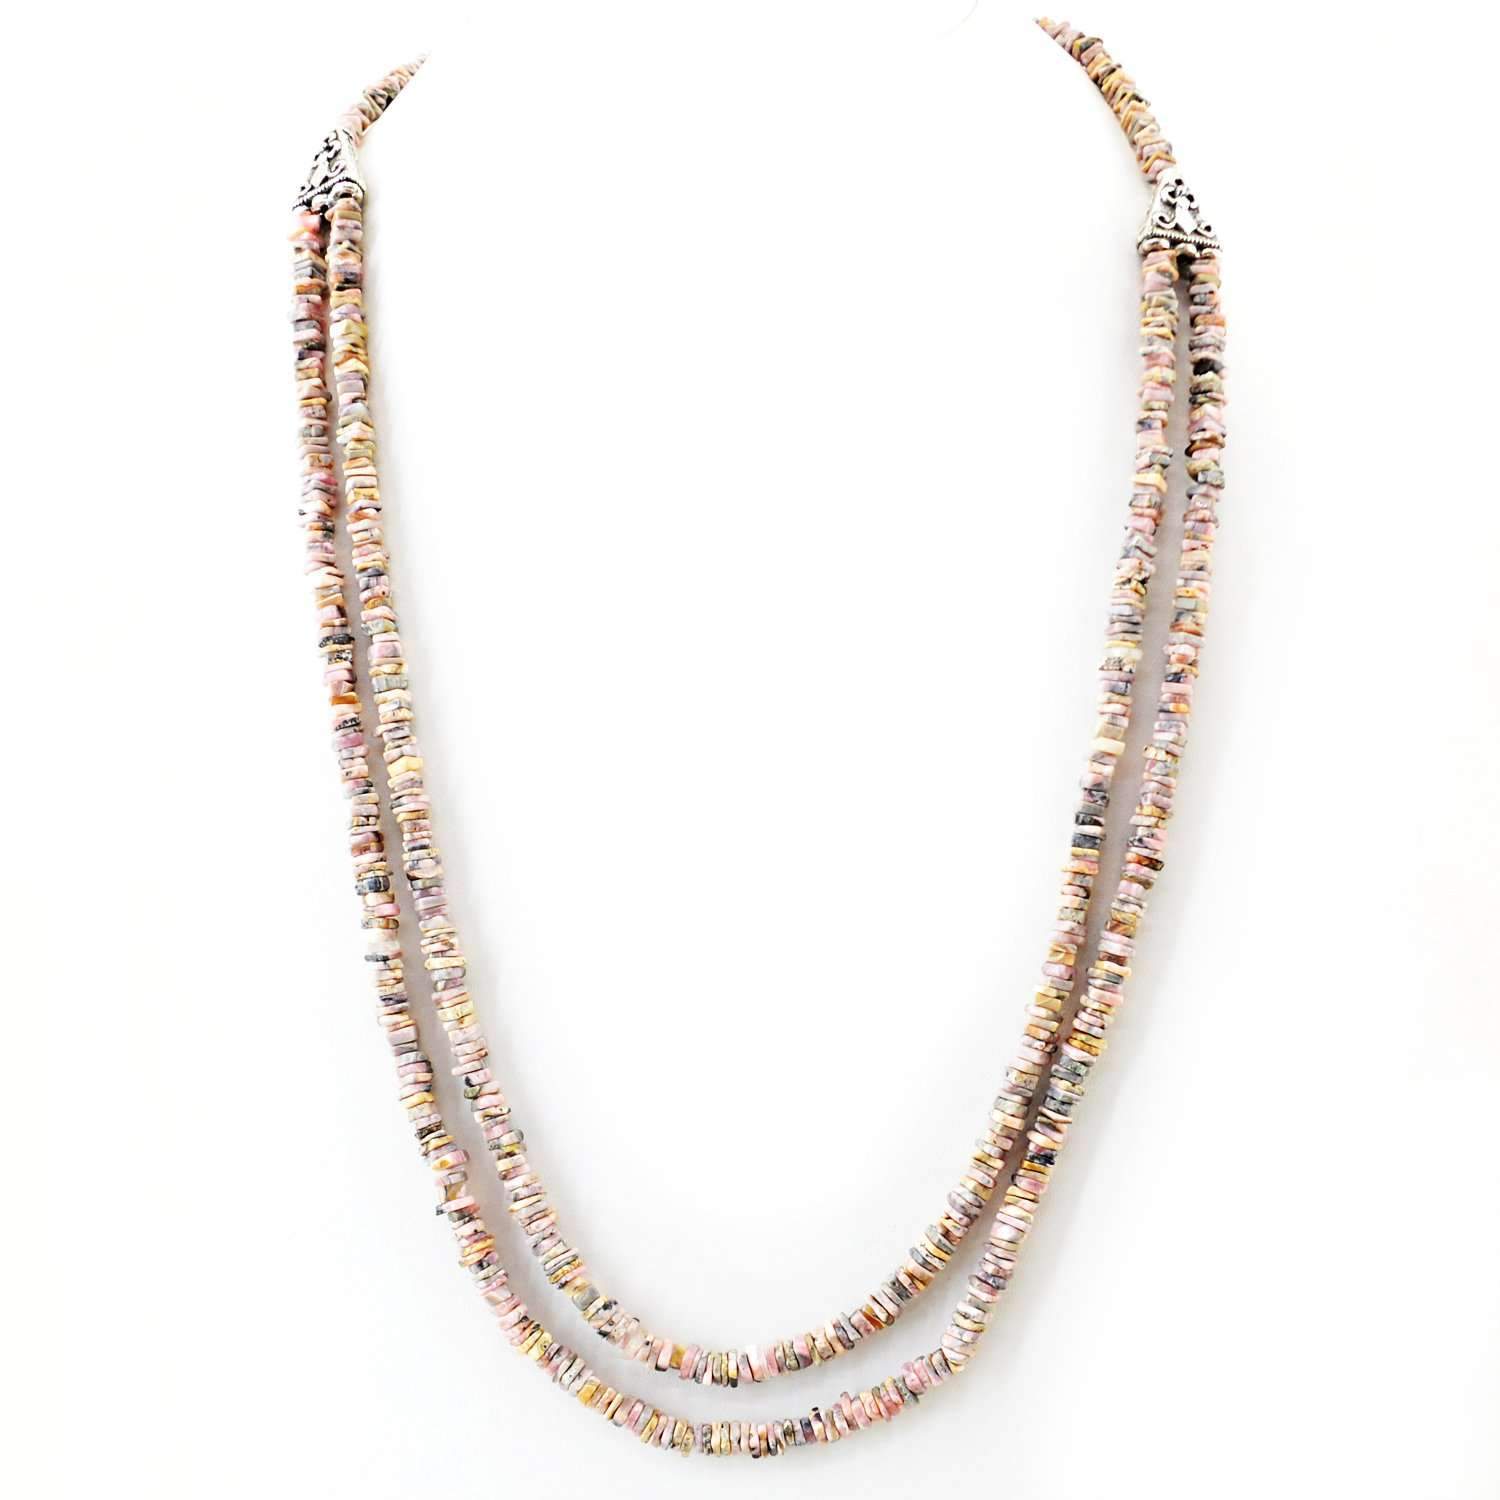 gemsmore:2 Strand Pink Australian Opal Necklace Natural Untreated Beads - Amazing